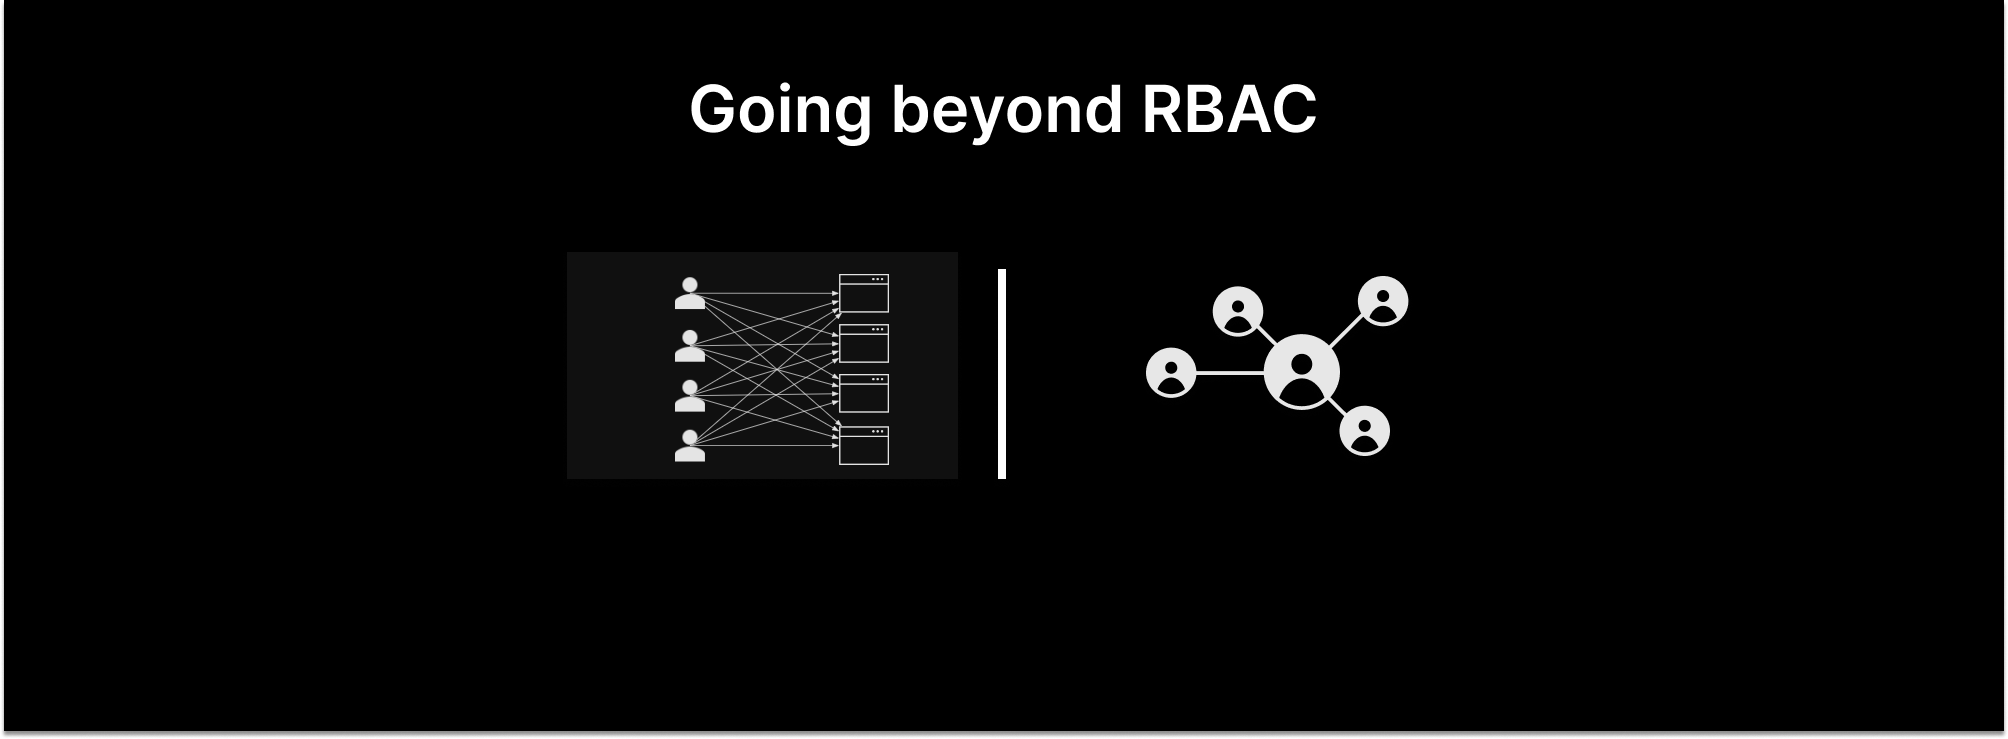 Going beyond RBAC to fine-grained access controls